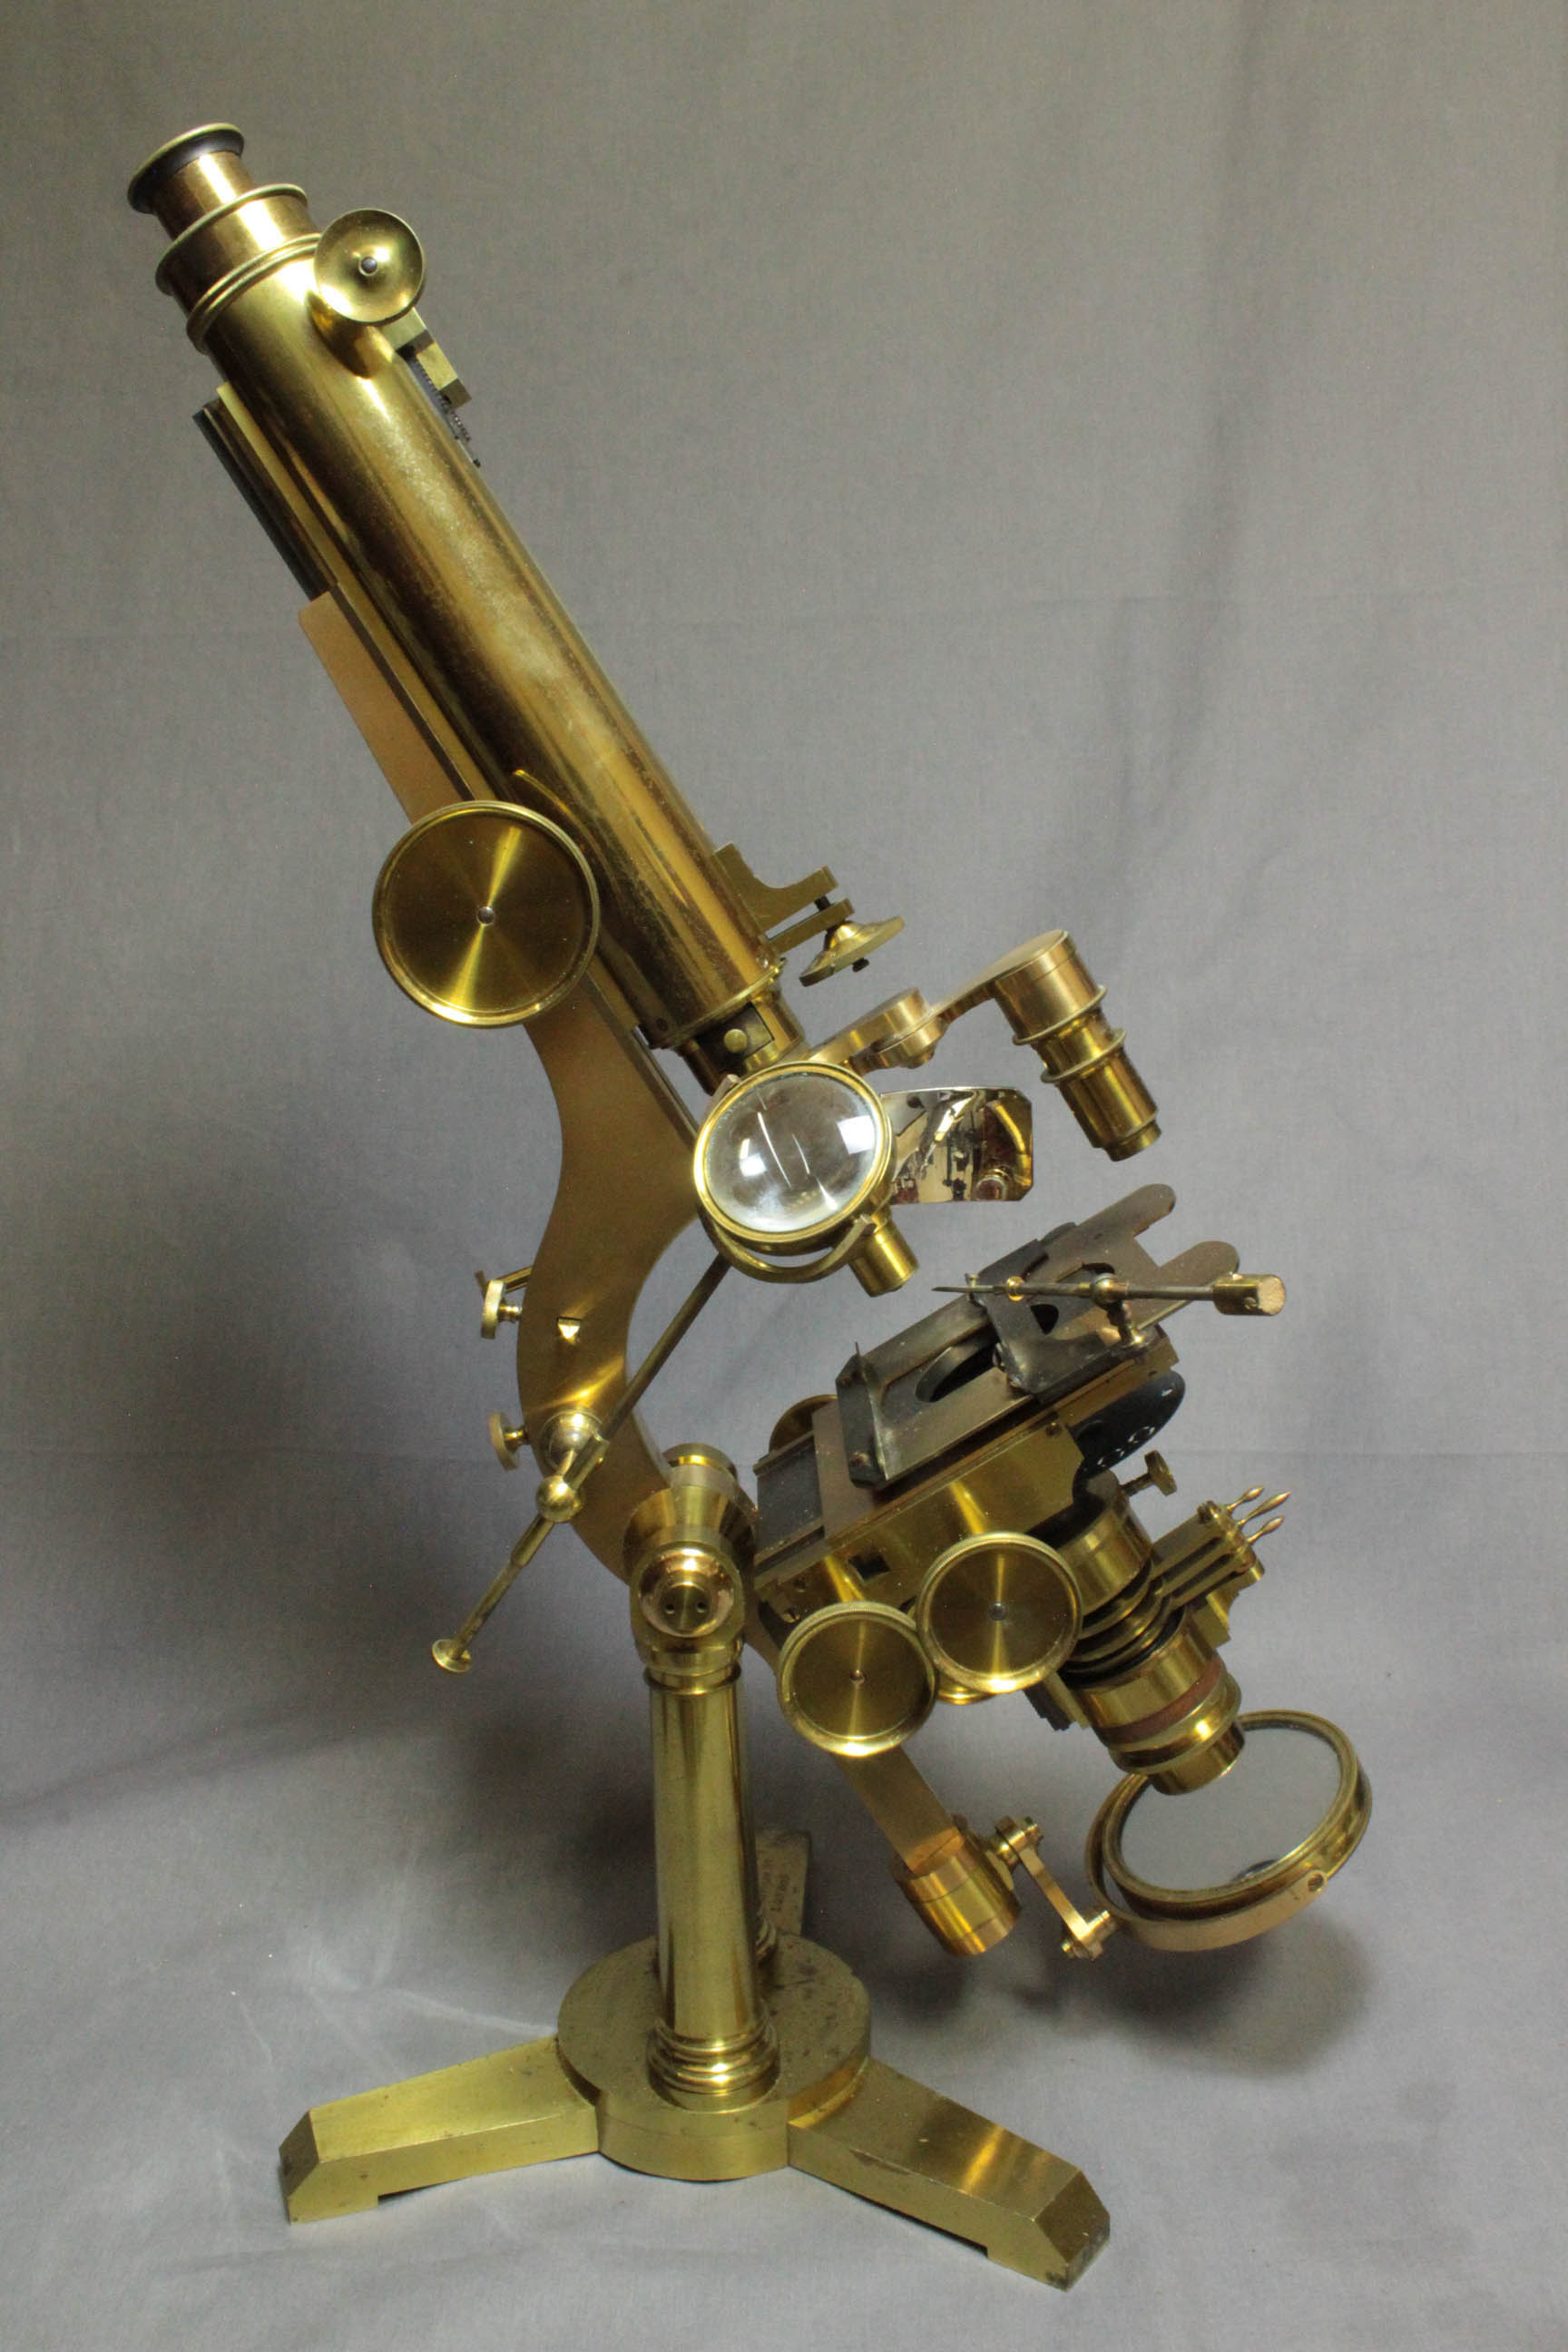 Smith & Beck Best No 1 microscope